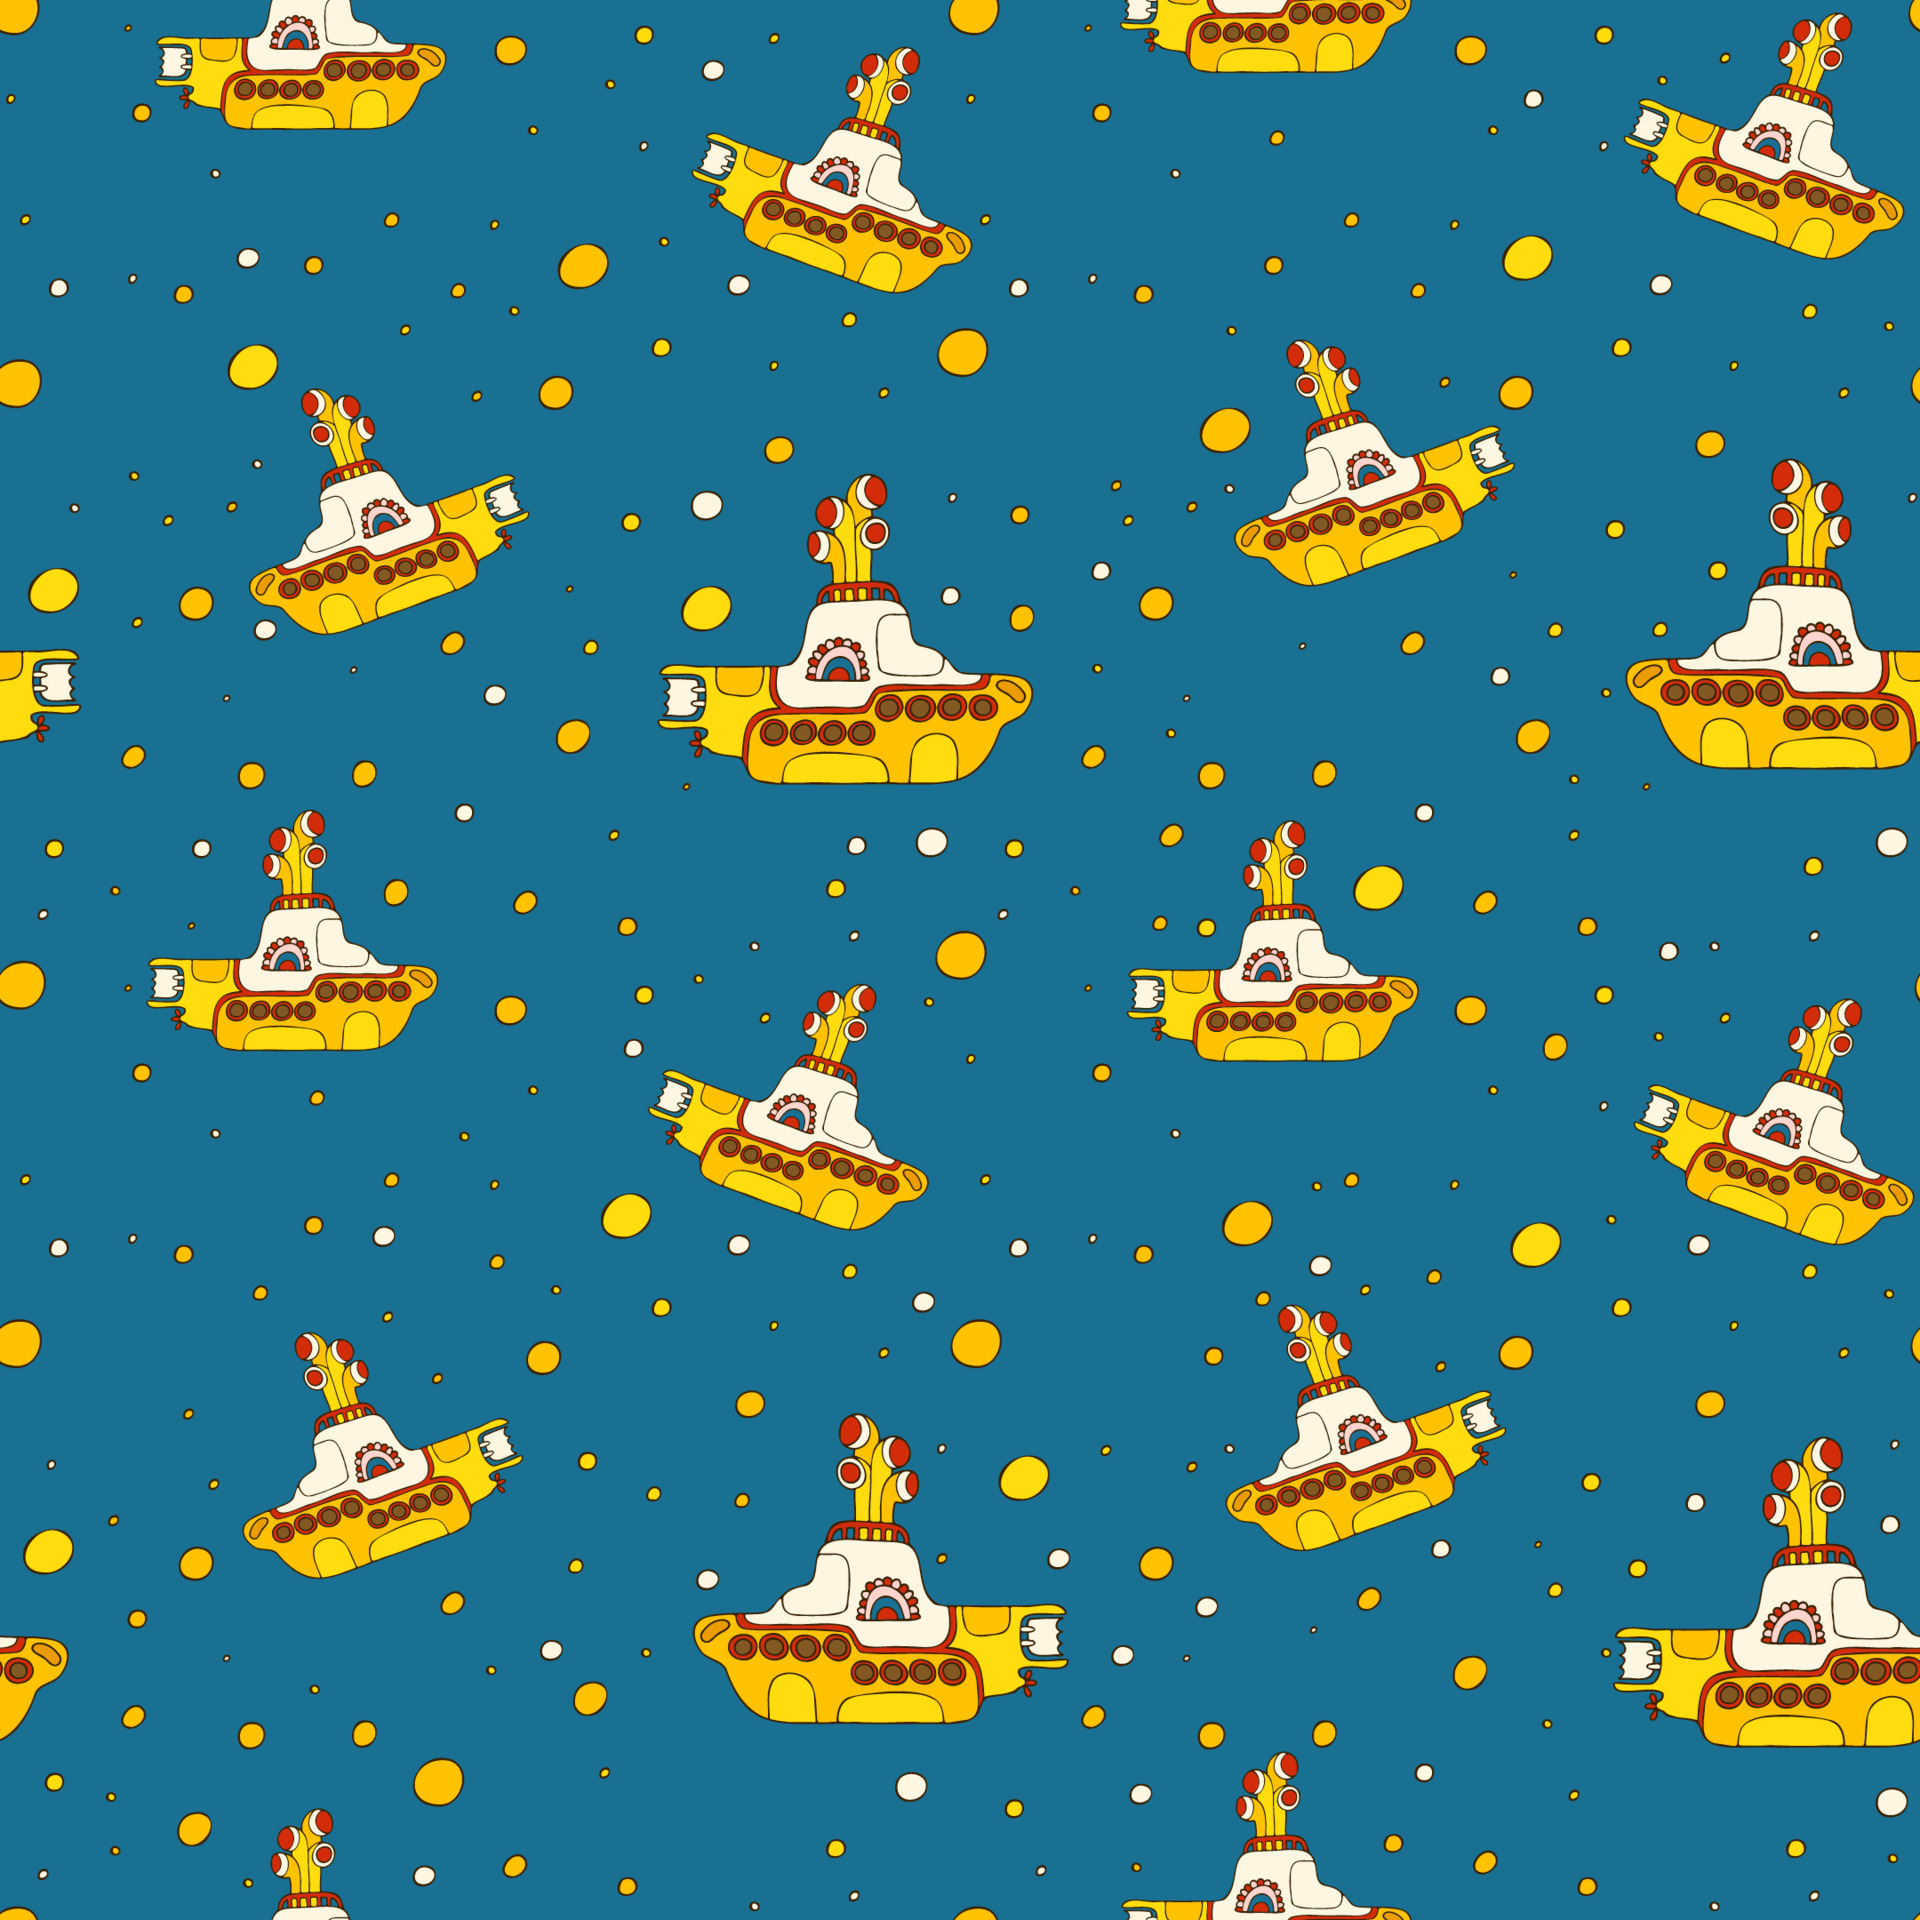 1920x1920 Yellow submarine with bubbles. The Beatles. Seamless pattern. A hand-drawn doodle-style illustration. 4272748 Vector Art